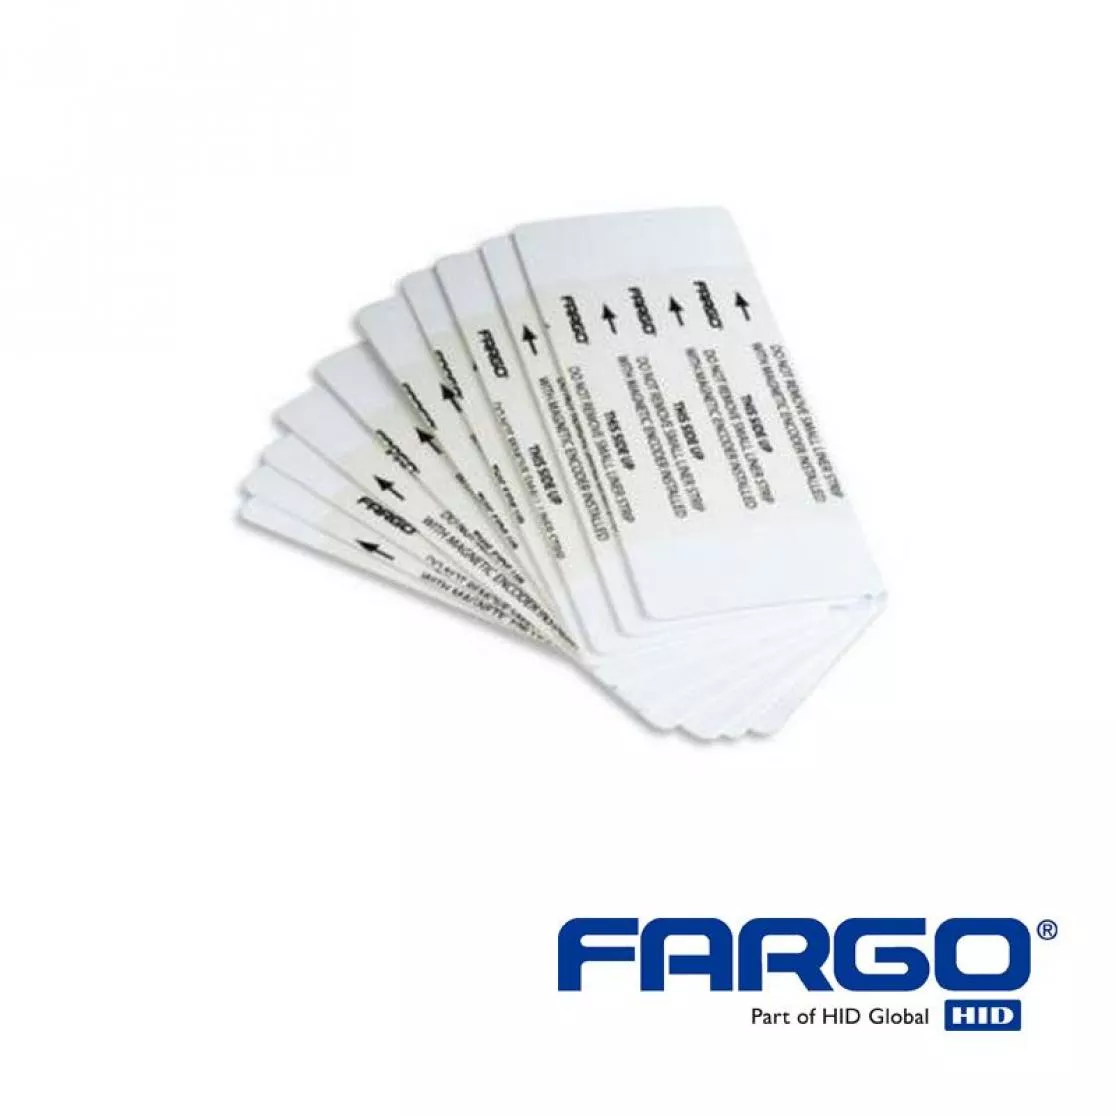 Iso-Propyl Cleaning cards double-sided for hid fargo HDP5000 card printer